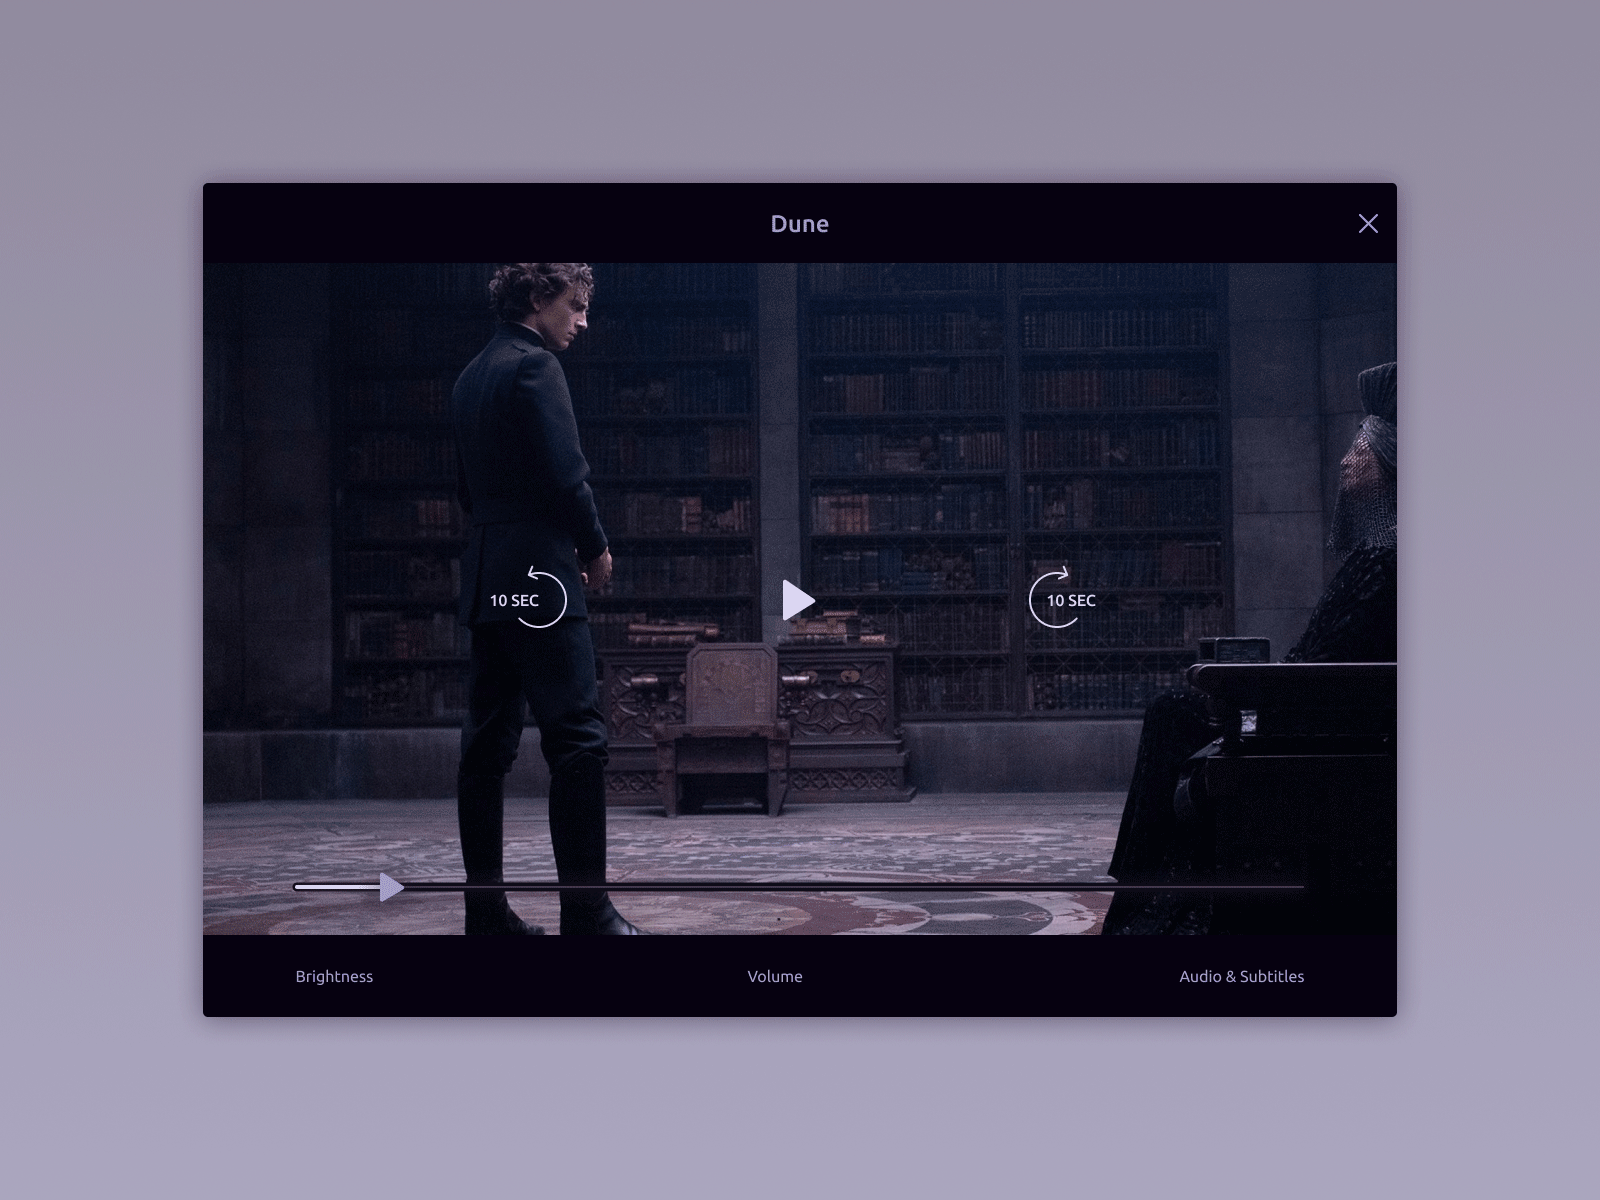 upstream | Daily UI Challenge 057 (Video Player) 057 57 daily ui daily ui 057 dailyui dailyui057 dailyuichallenge play player ui video video player